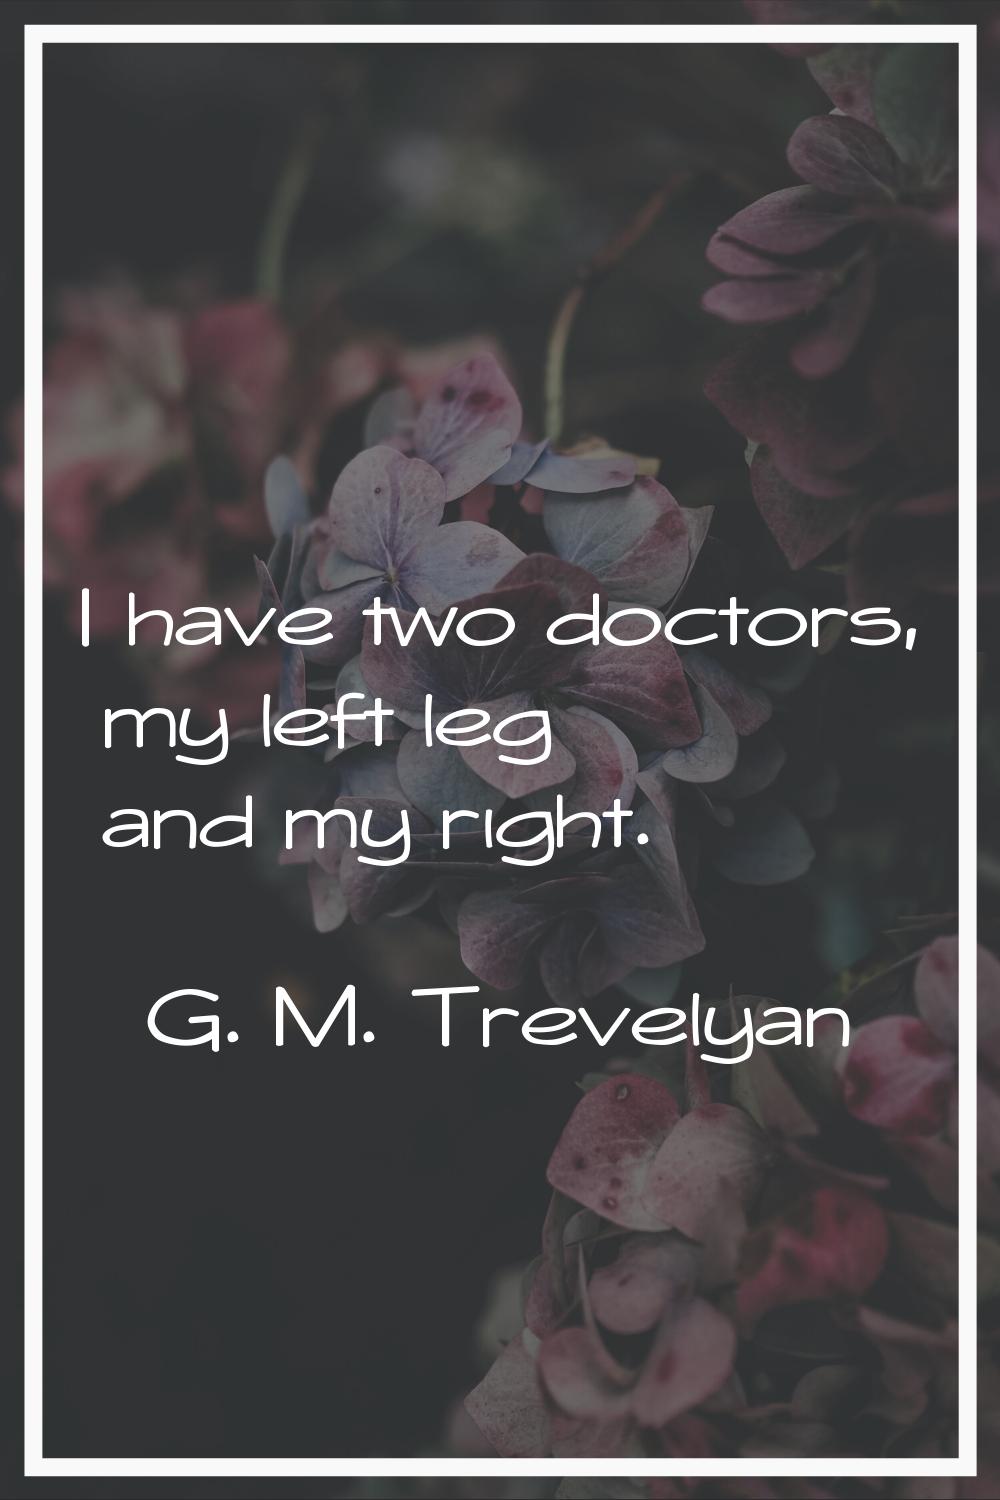 I have two doctors, my left leg and my right.